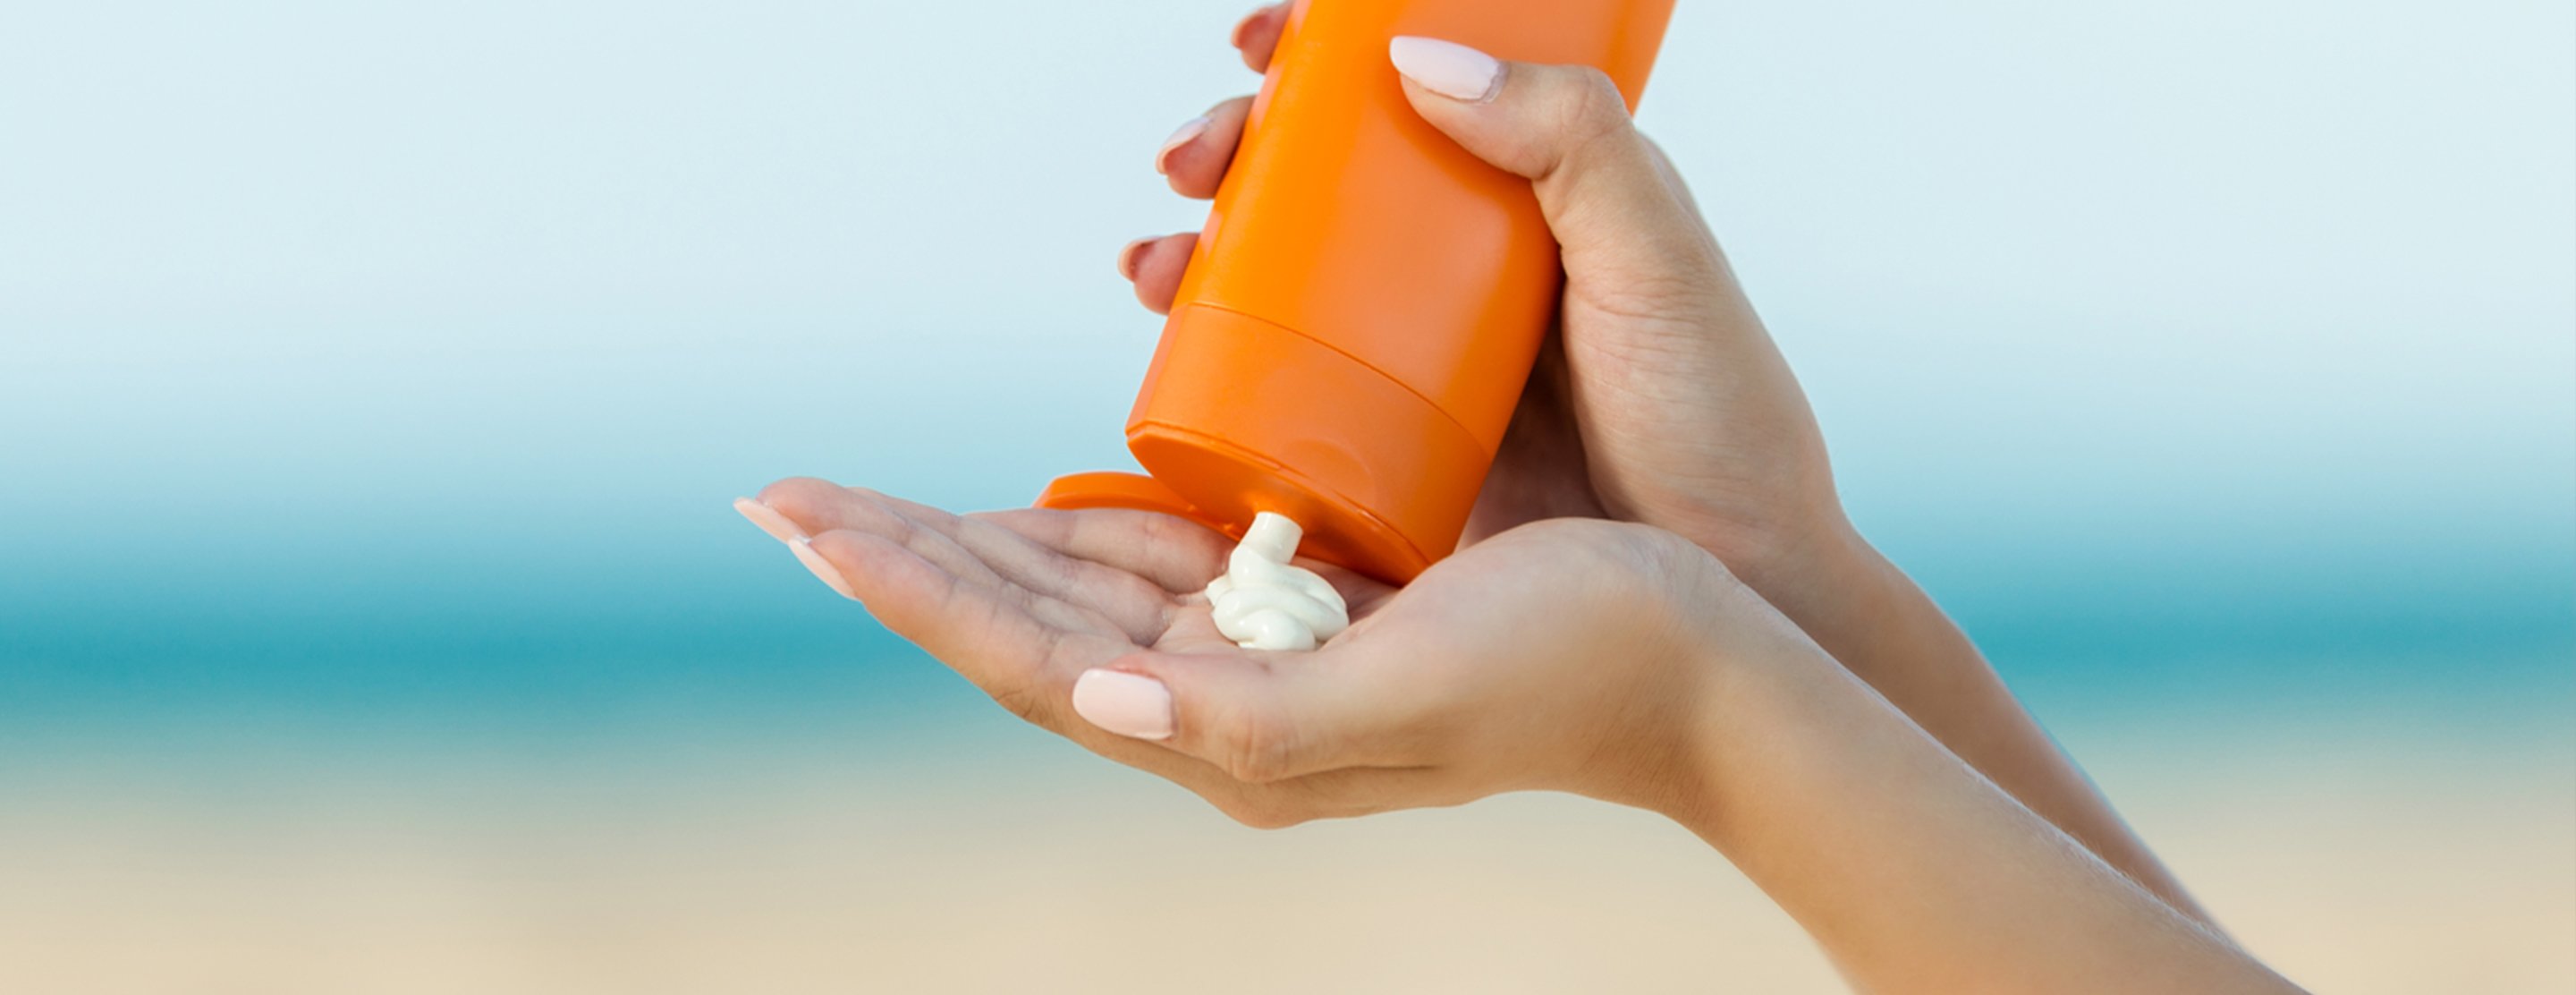 Sunscreen for Skin Cancer Prevention | Patient Education | UCSF Health